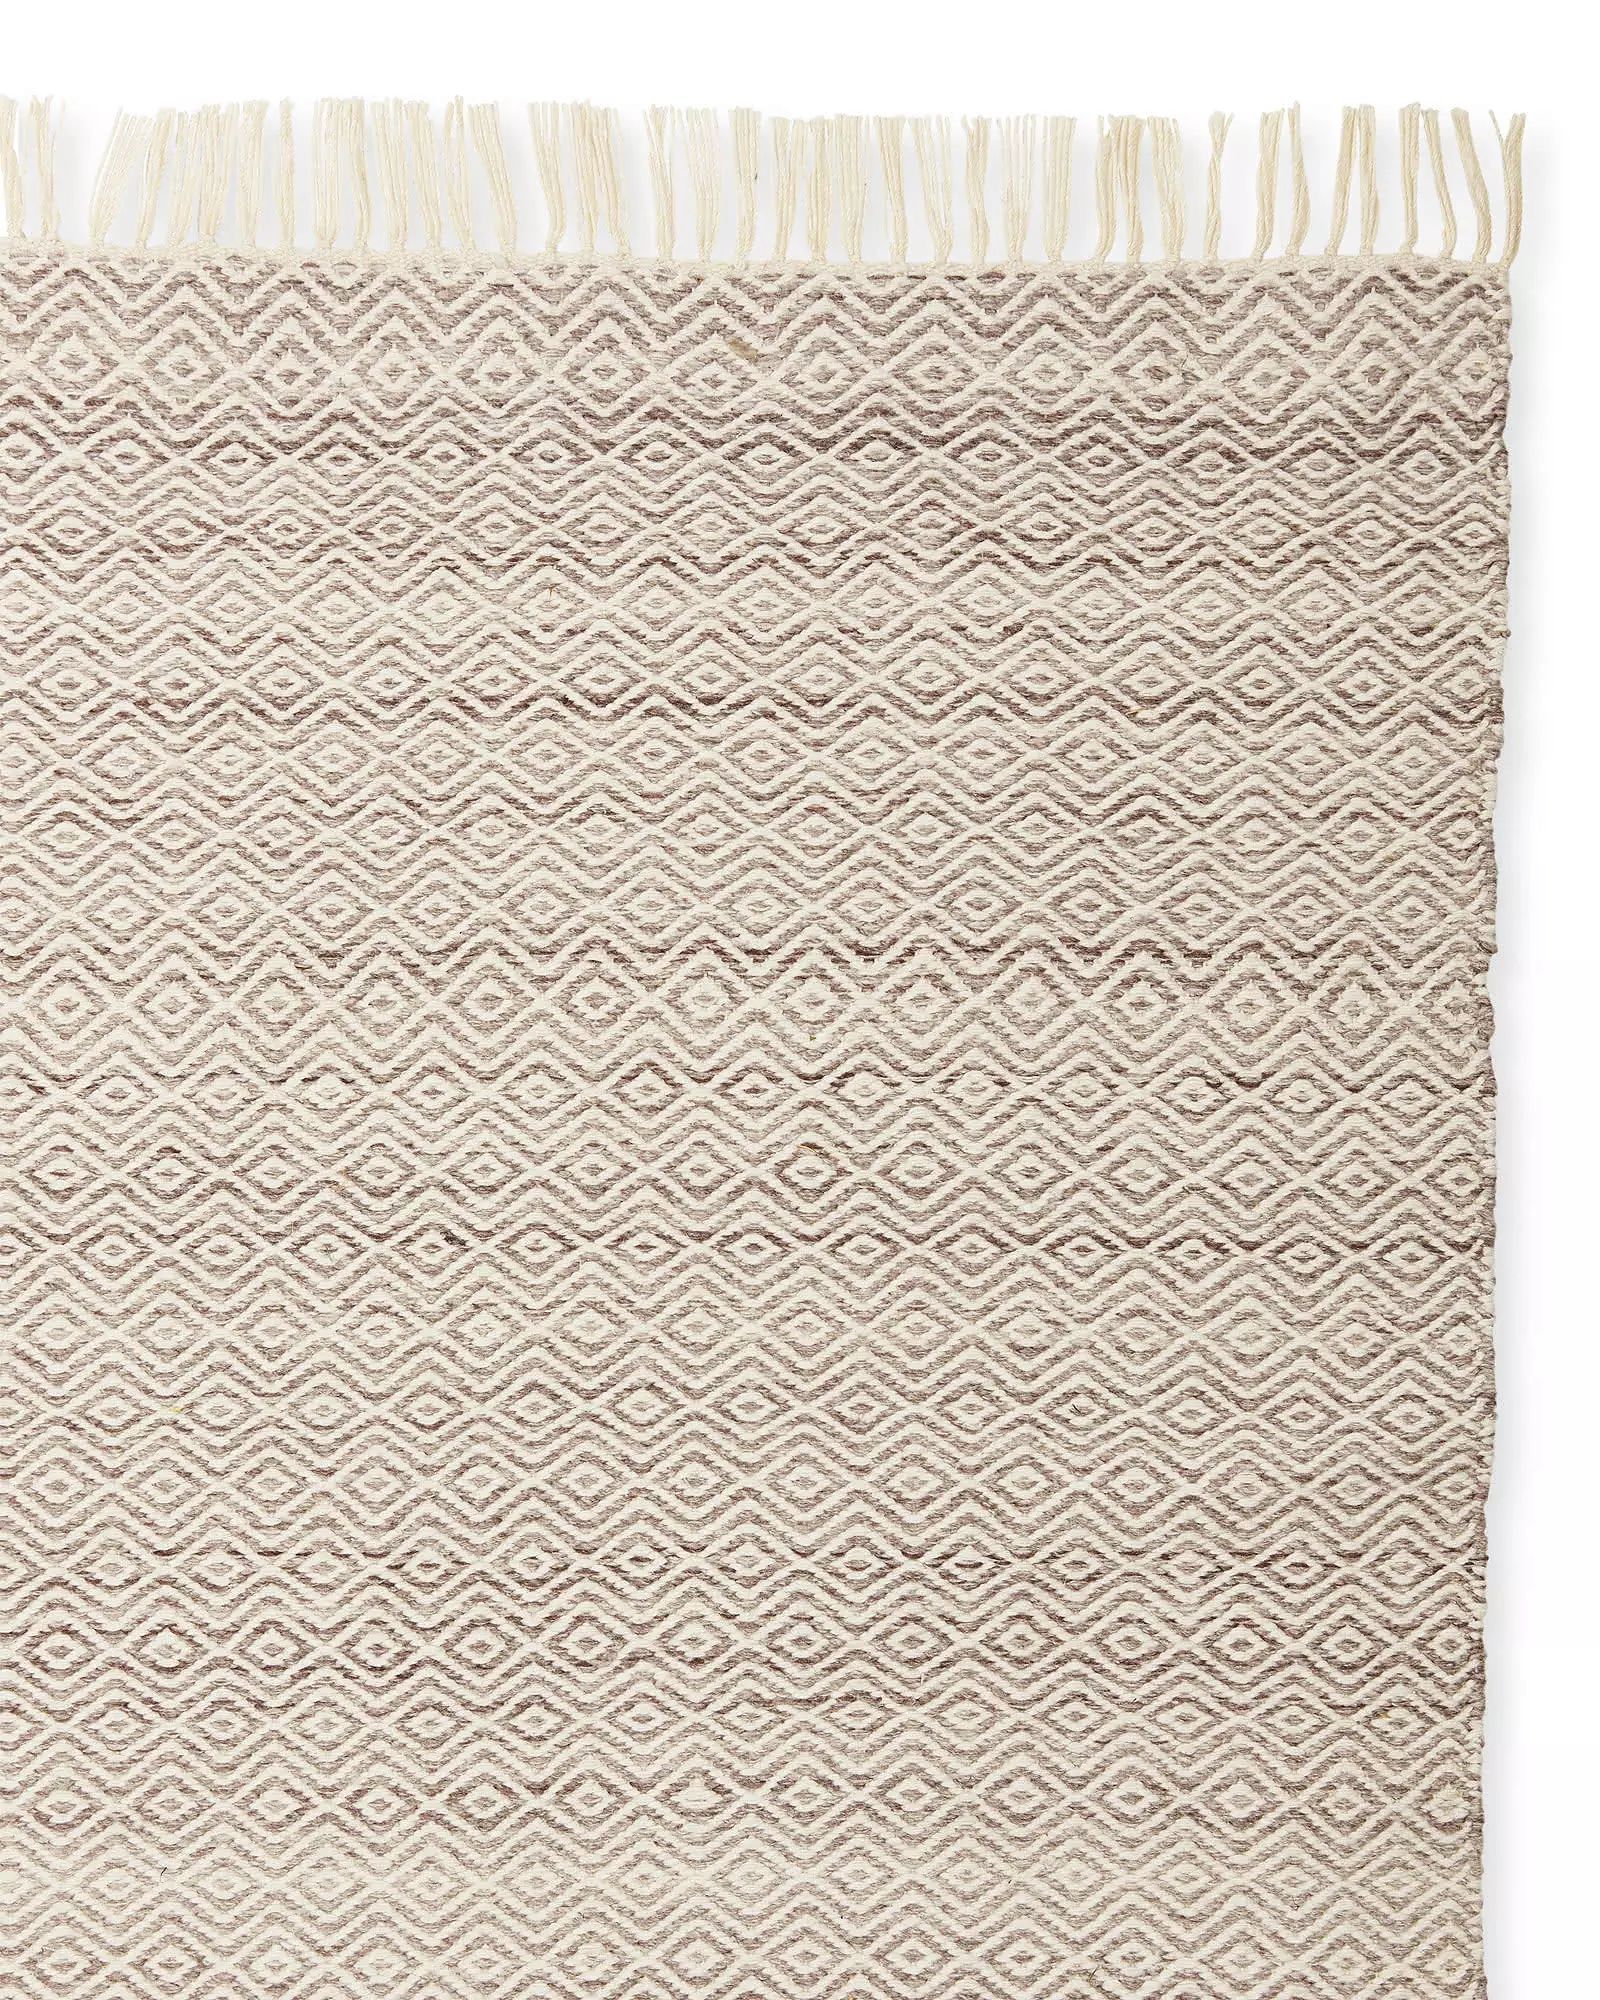 Seaview Rug | Serena and Lily